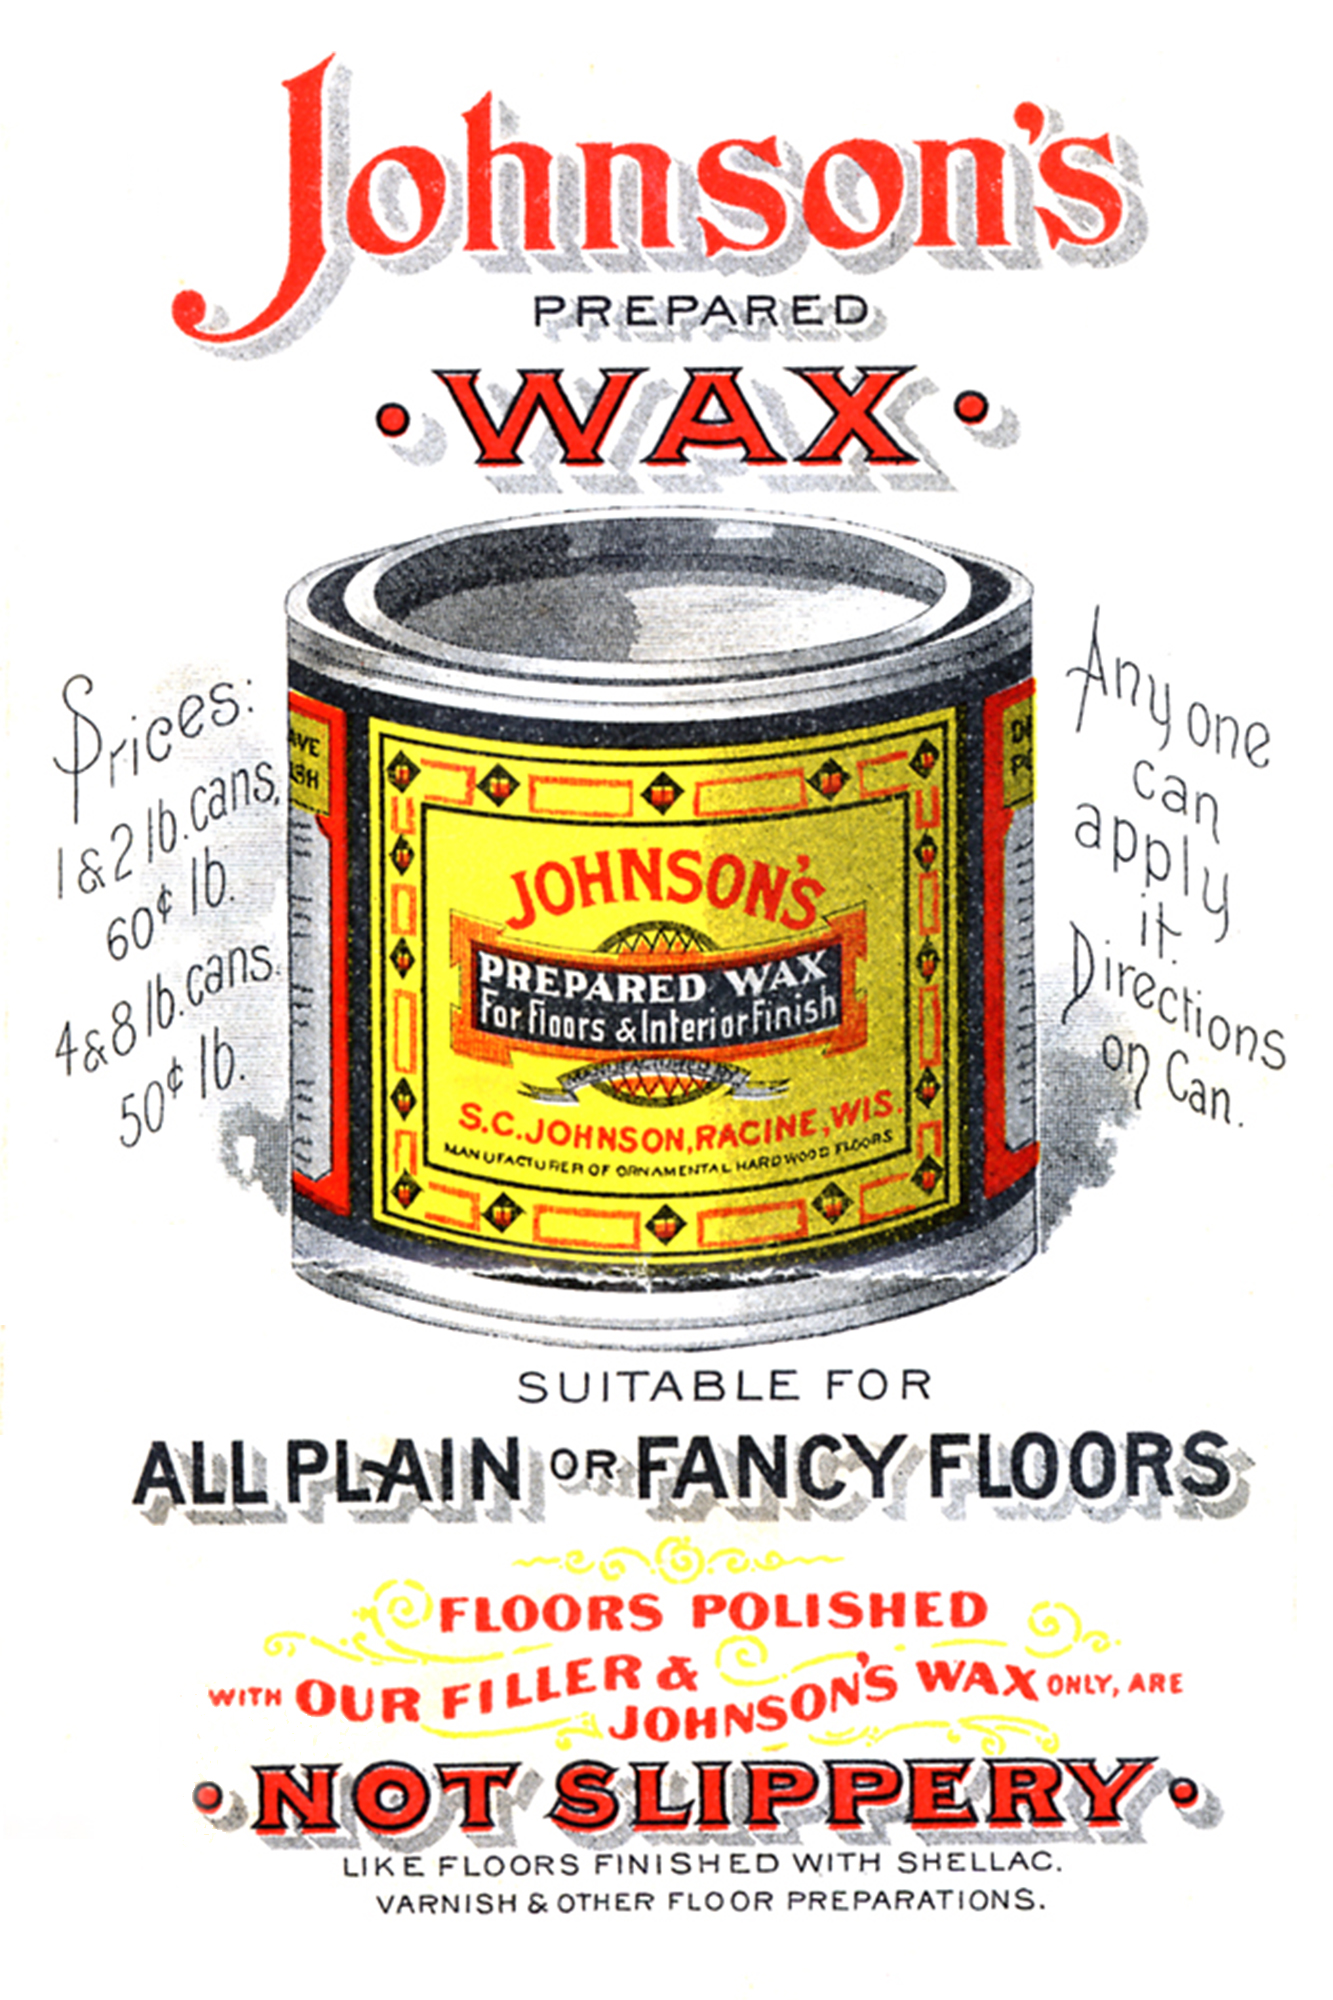 Johnson’s Prepared Wax vintage ad from 1898